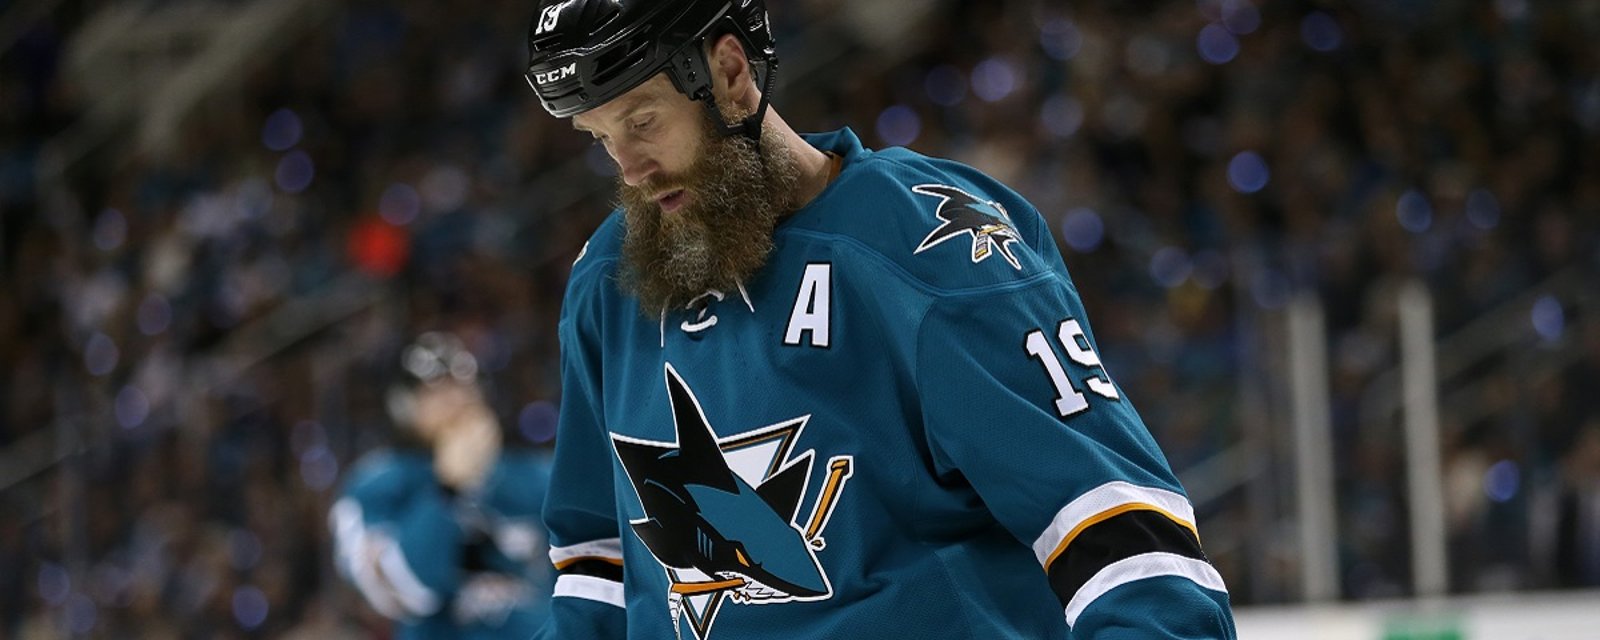 Joe Thornton ripped for looking “too slow” in the Swiss League.